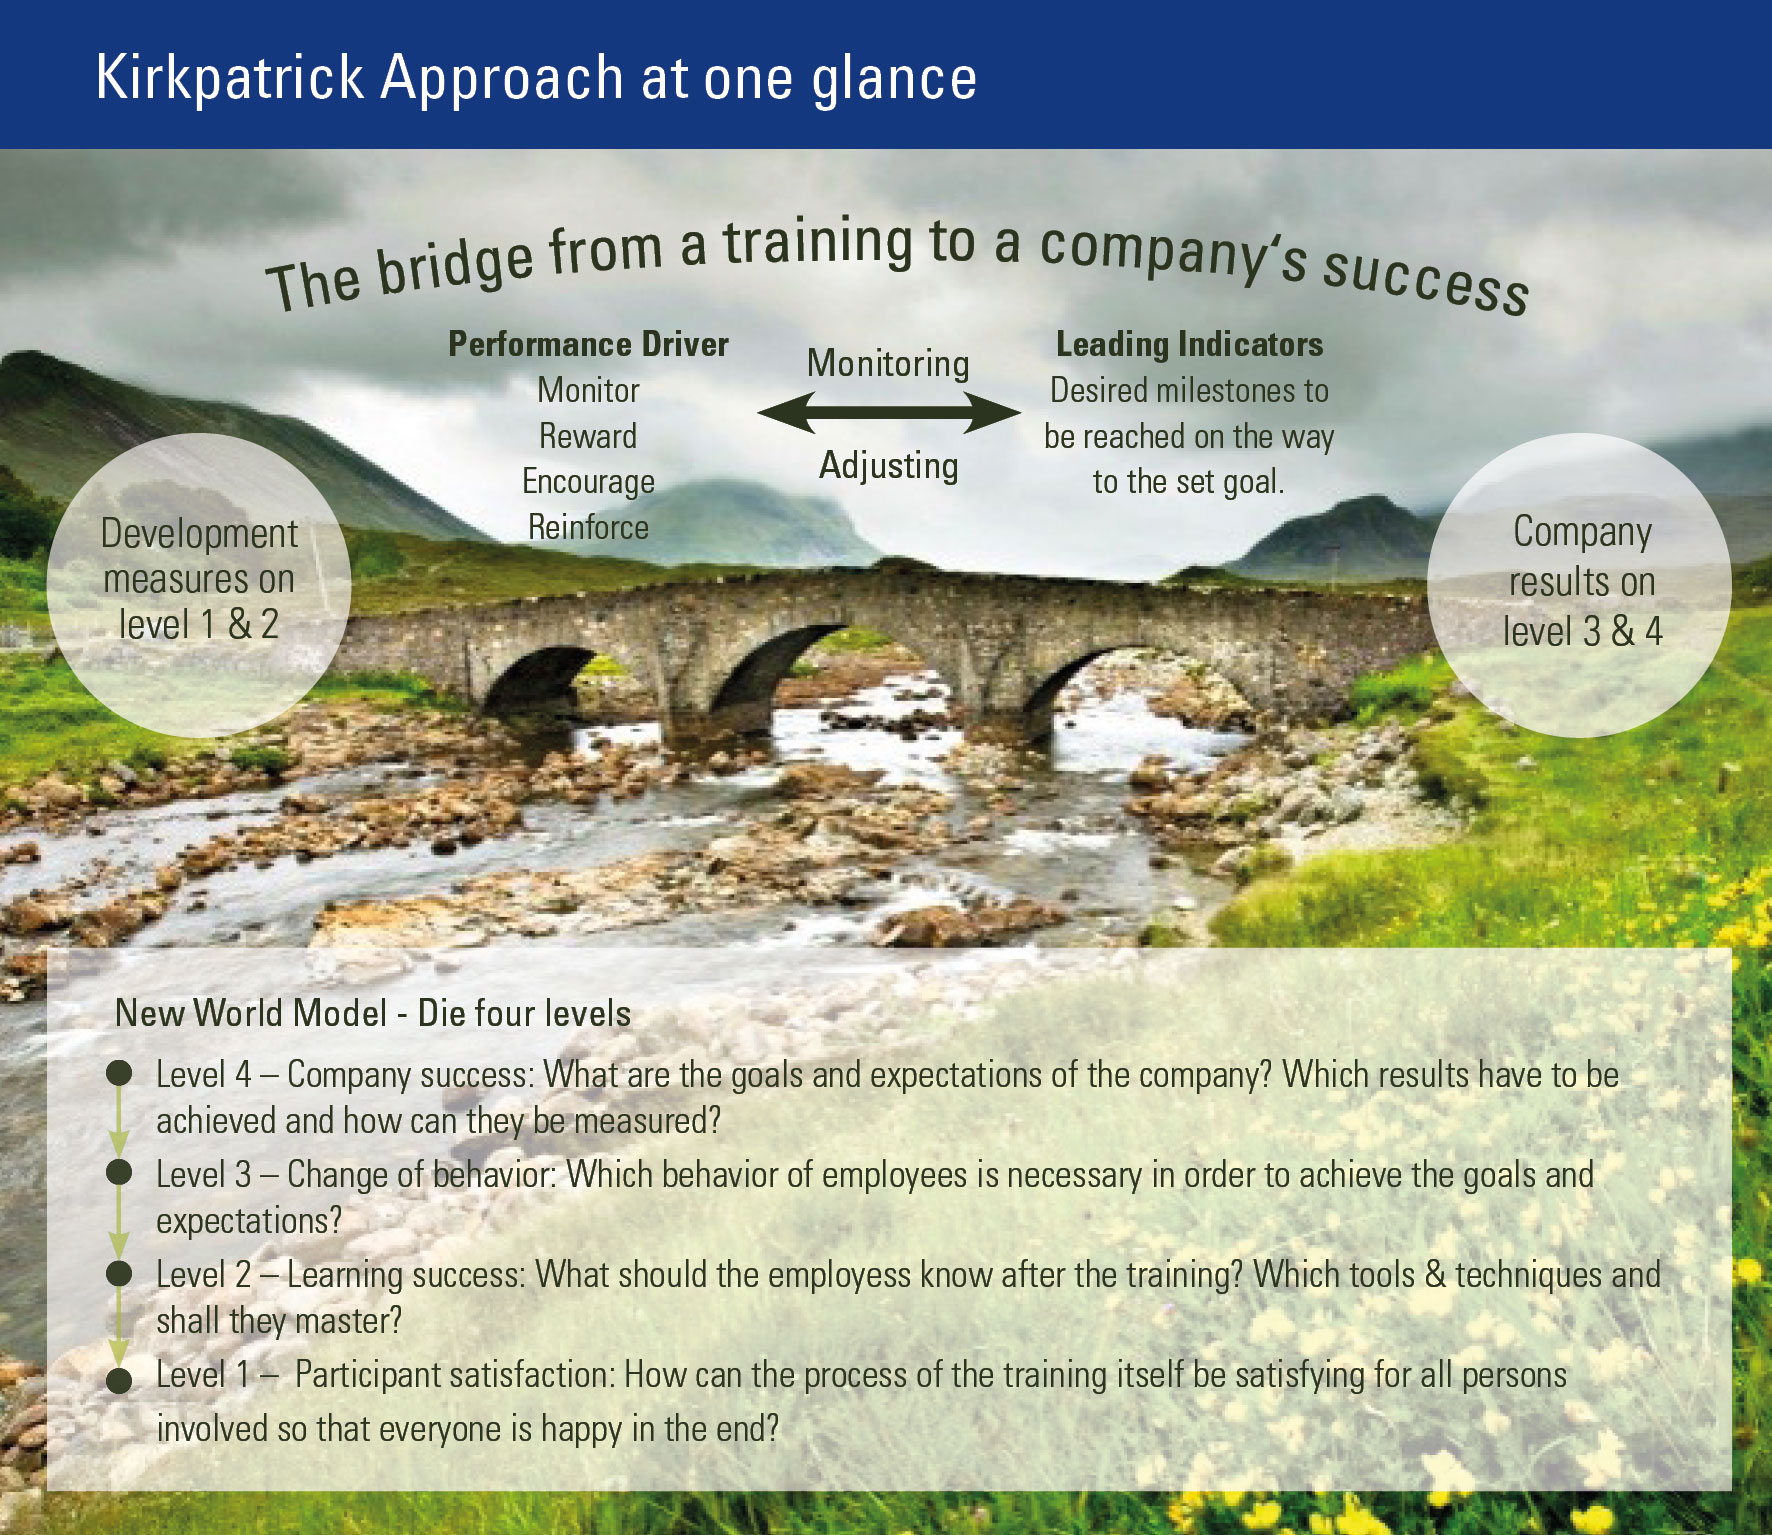 The Bridge from training to company results 